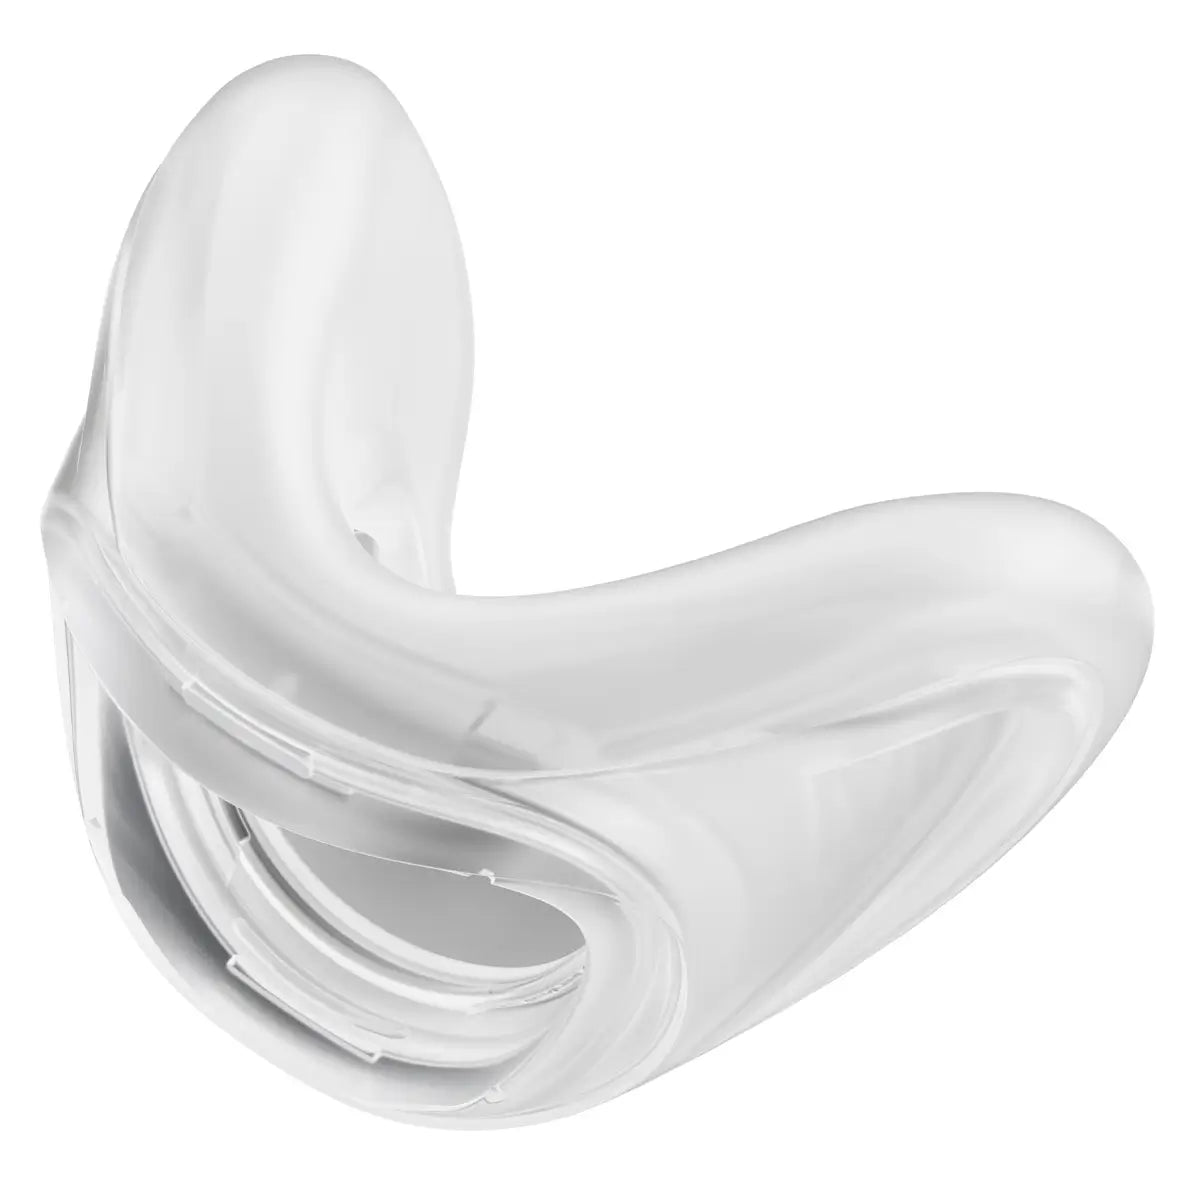 Close-up of the new cushion replacement for the Solo Nasal CPAP Mask, highlighting its snug fit and soft material.